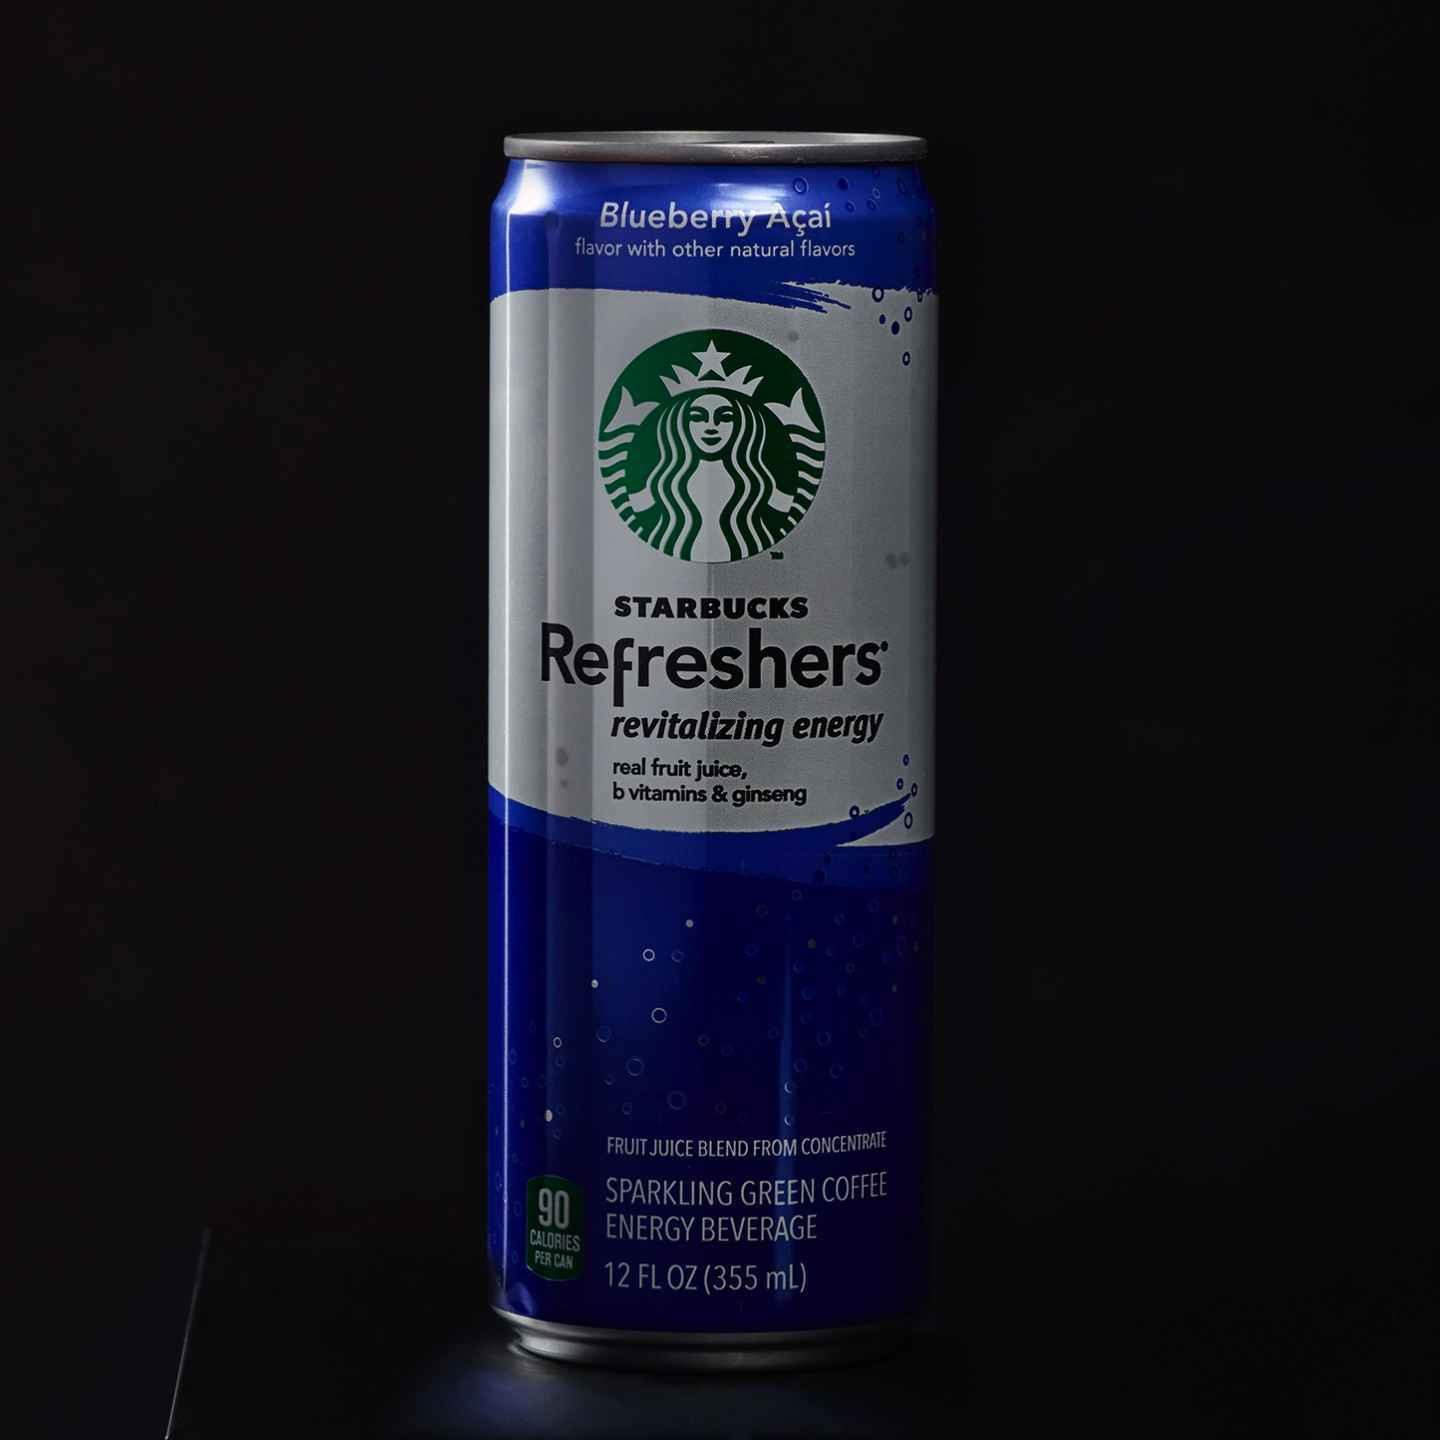 Starbucks Refreshers Blueberry Acai Nutrition Facts